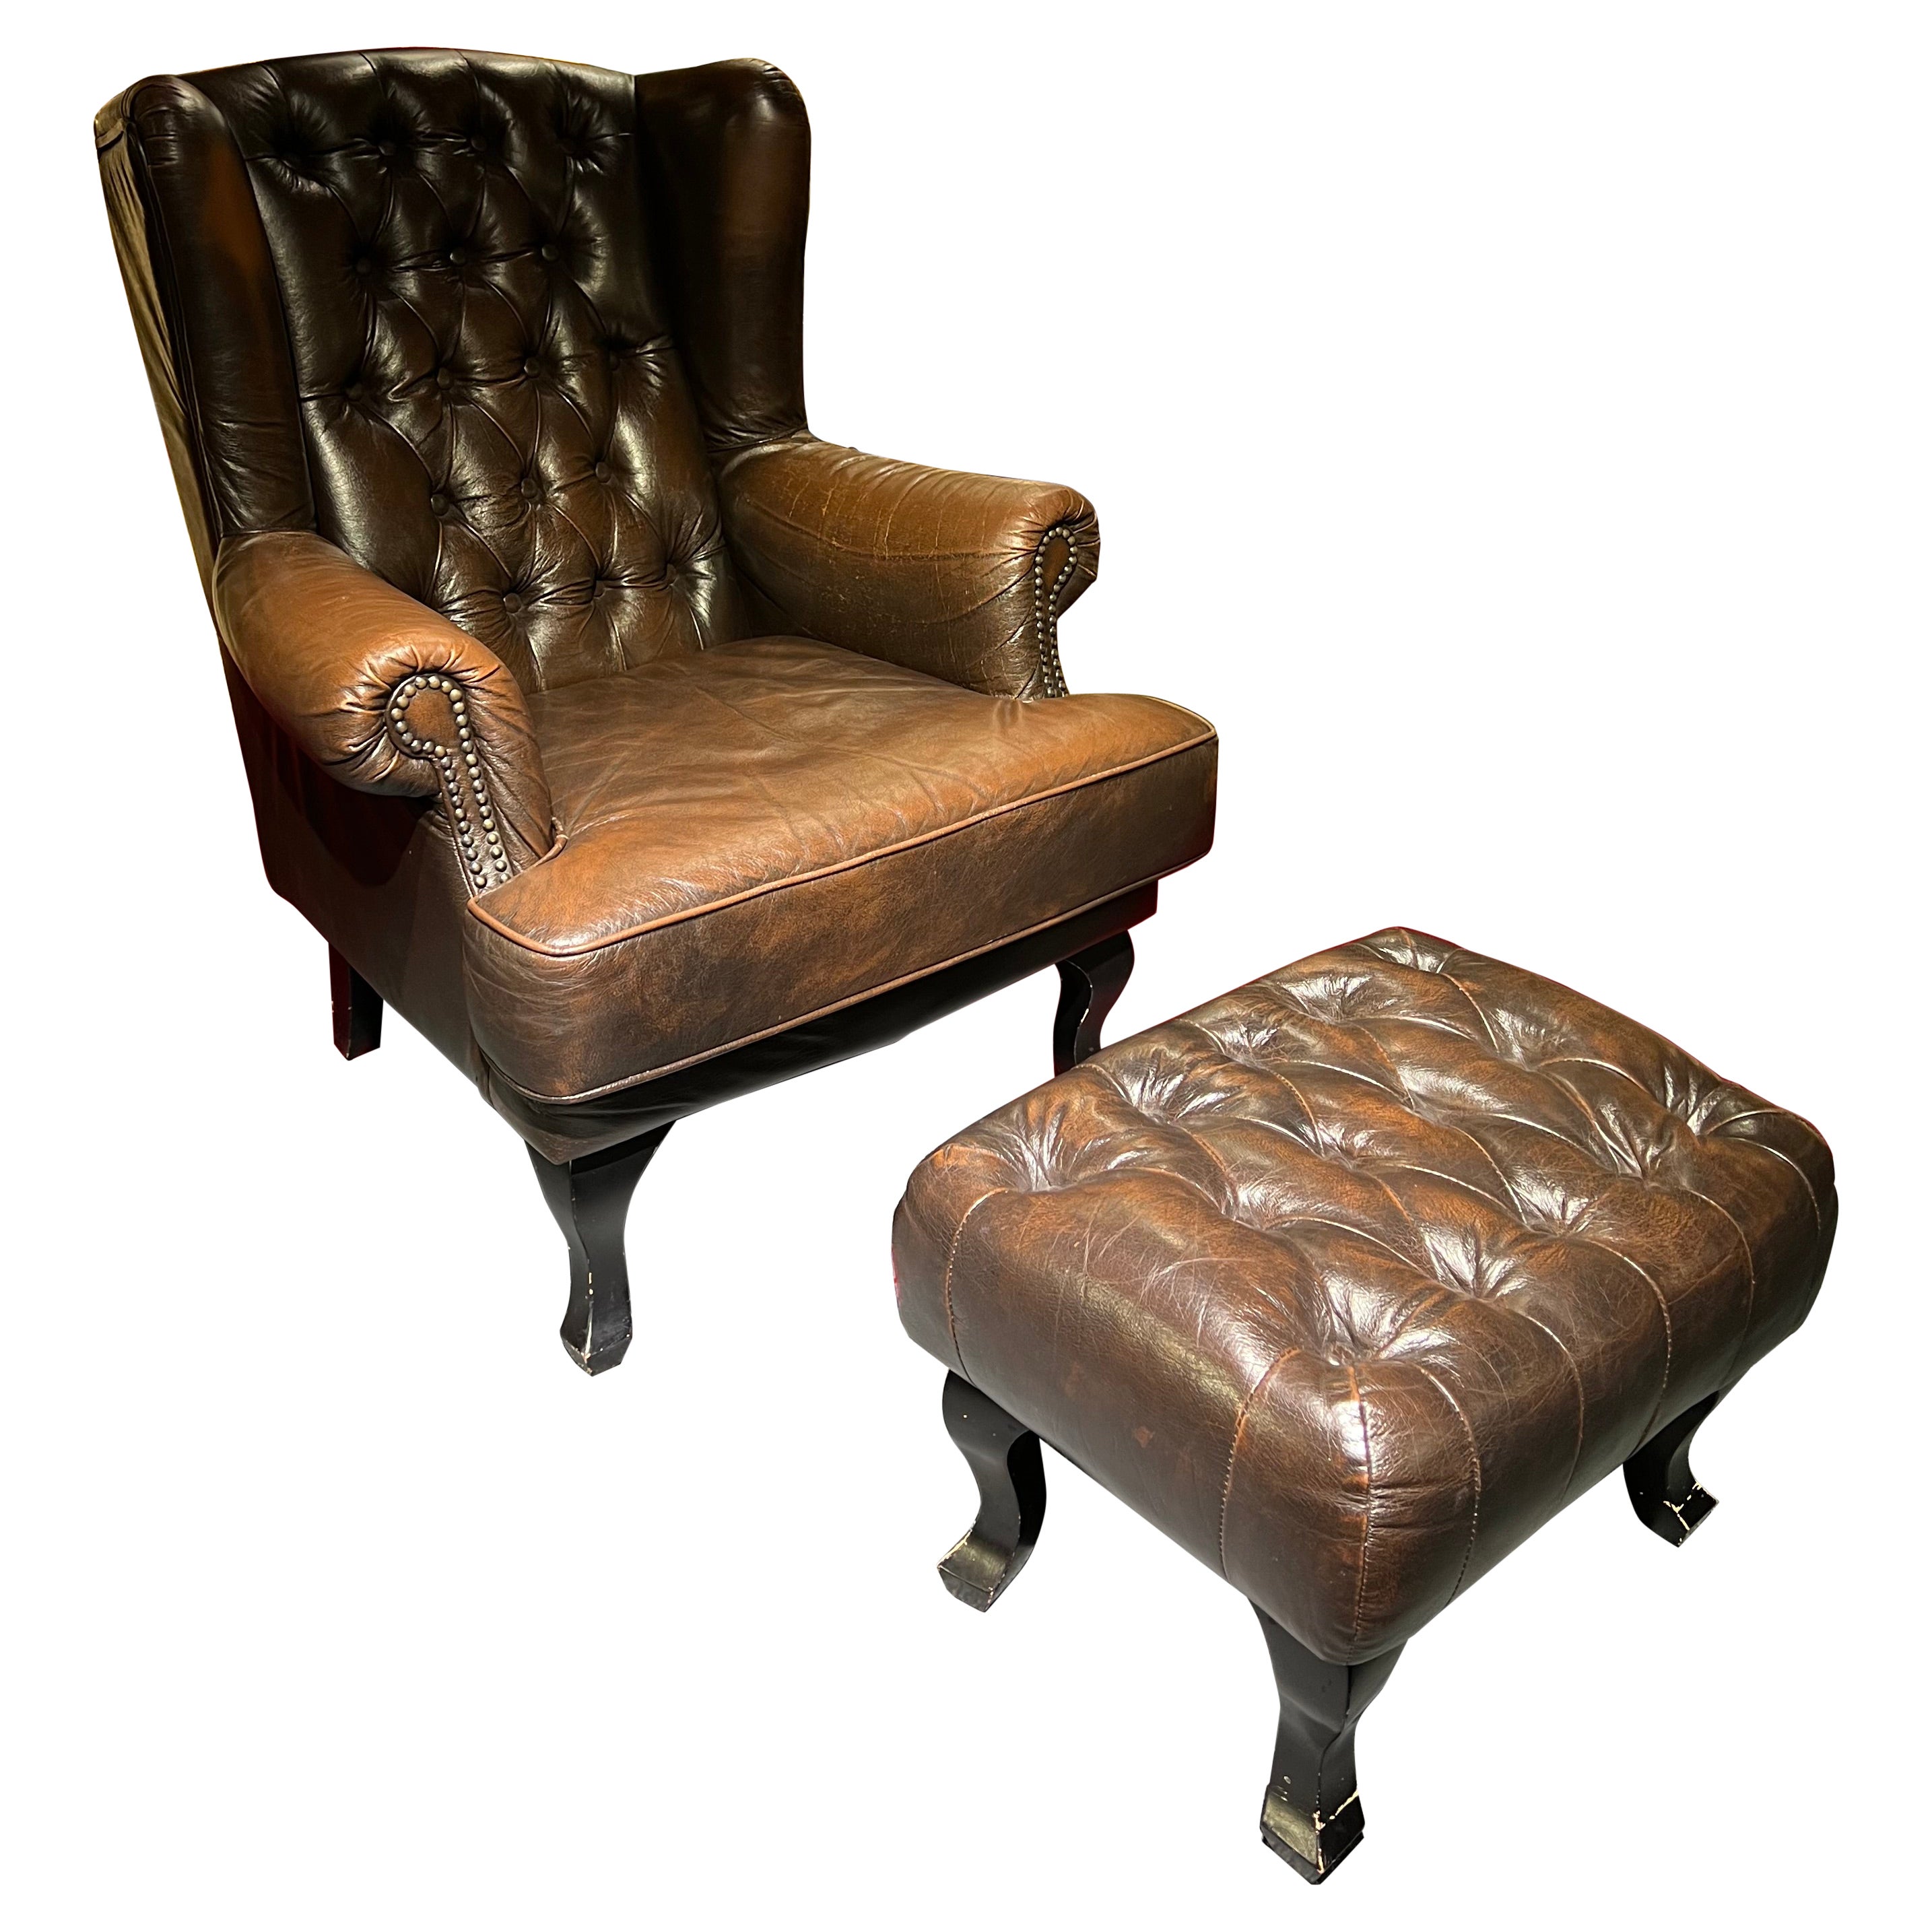 Chesterfield Tufted Dutch Brown Leather Library Club Armchair with Ottoman